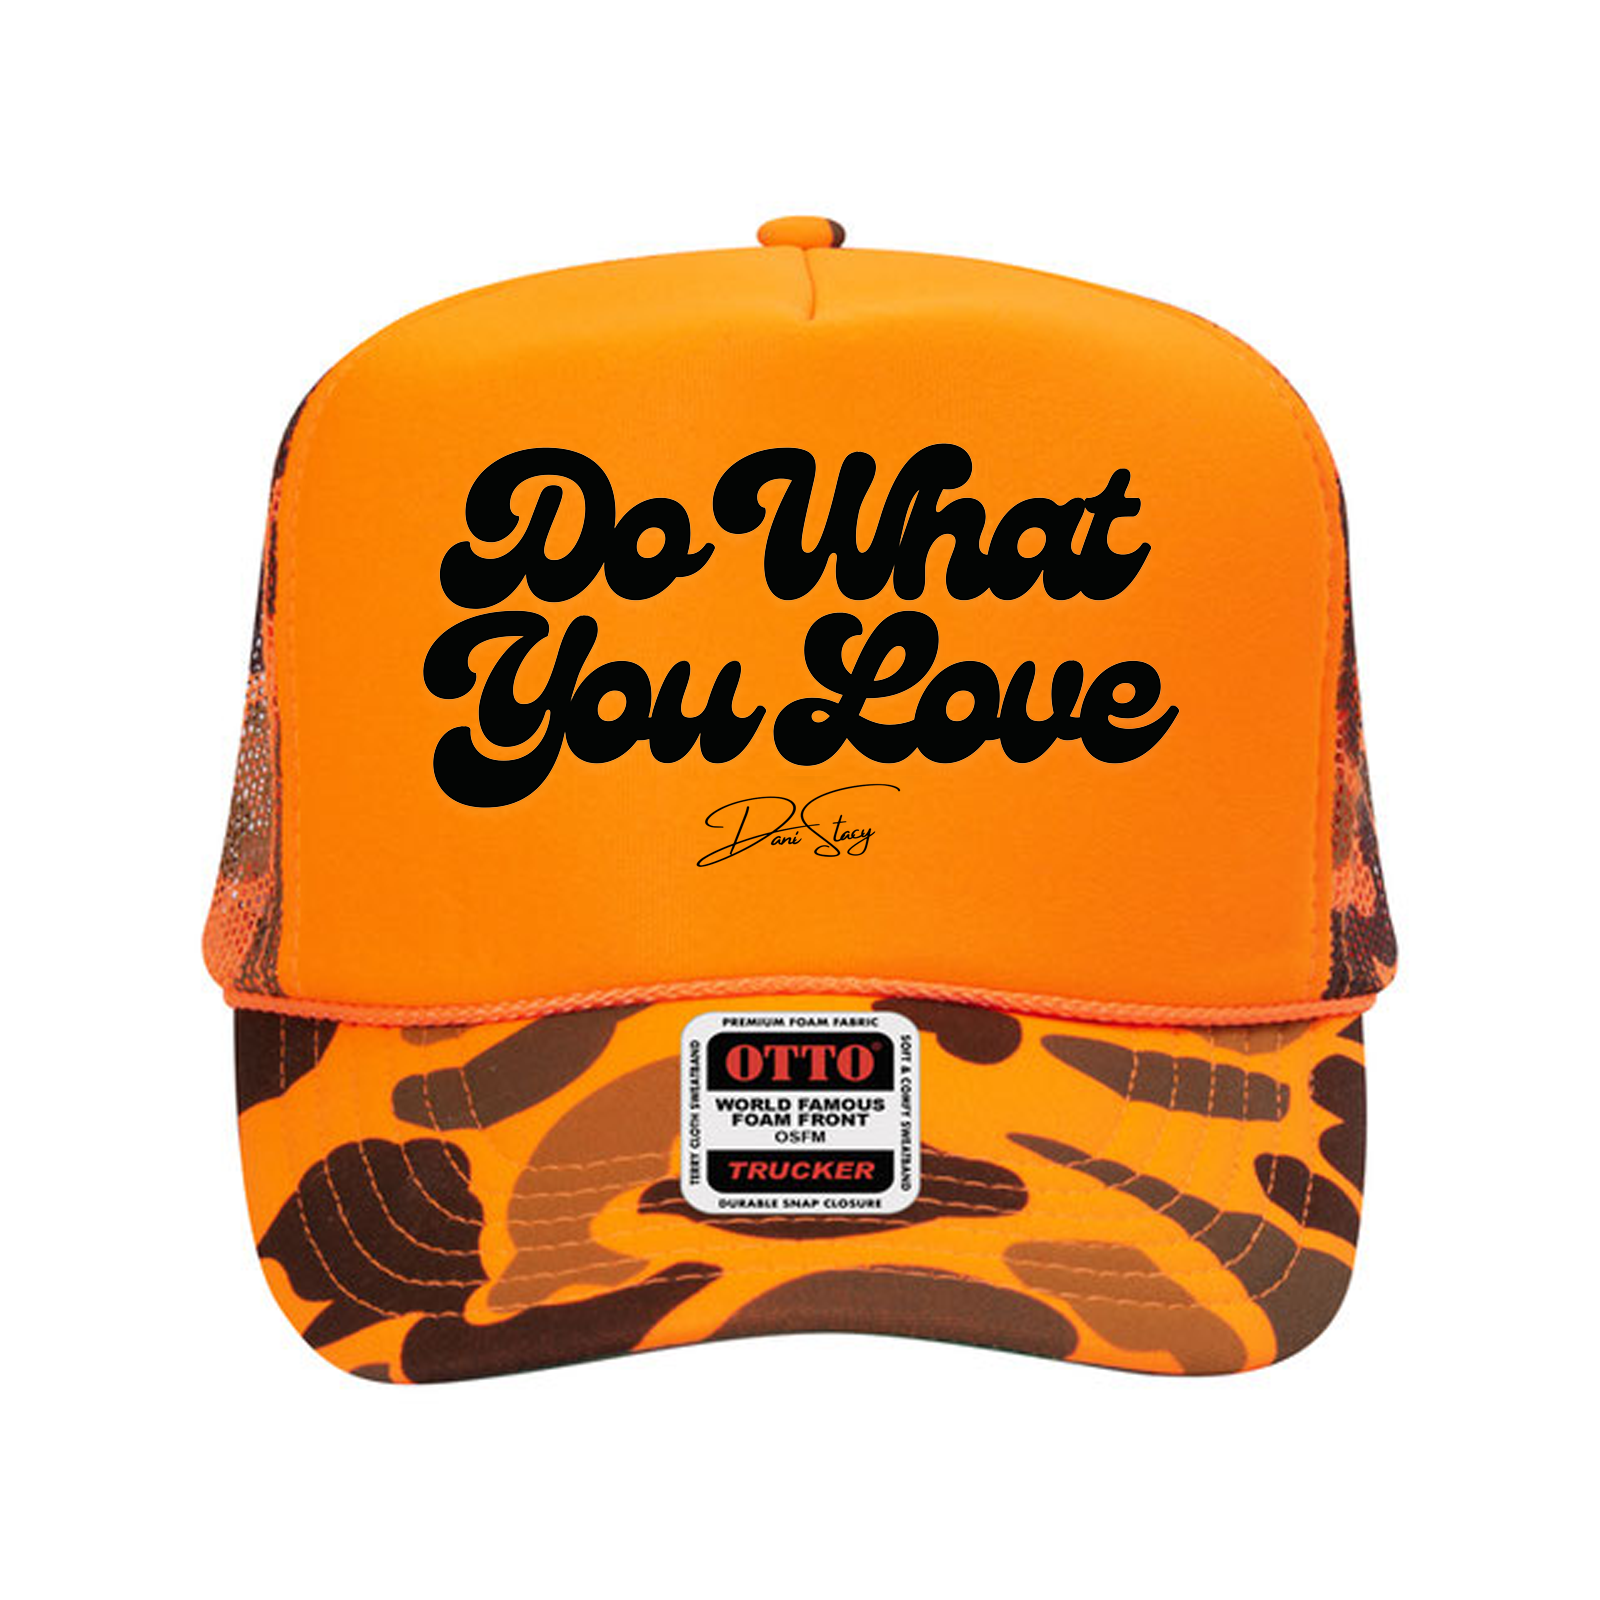 Neon camouflage polyester foam front five panel high crown golf style mesh back cap (plain front)